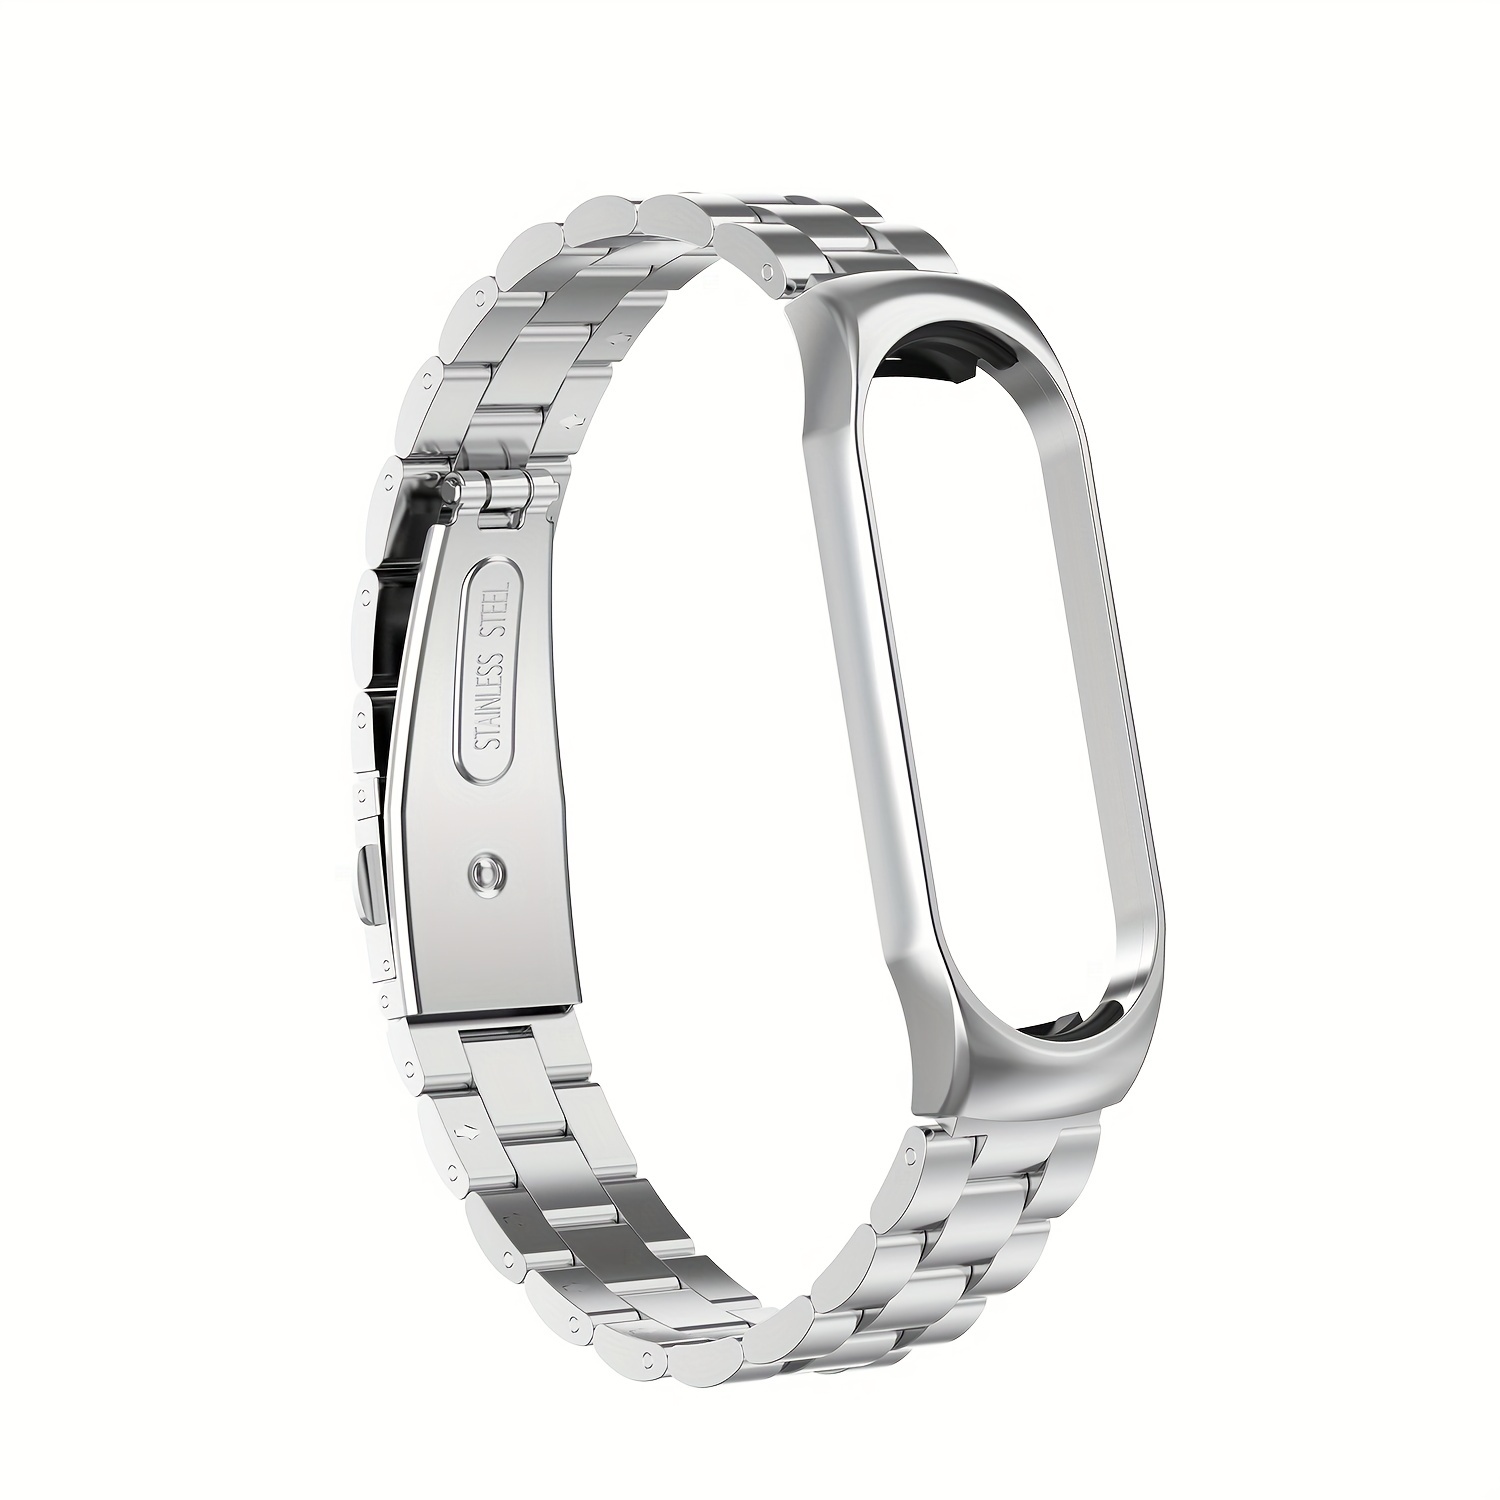 Stainless Steel Memory Wire Bracelets For Xiaomi Mi Band 7 Pro Stylish  Wristband Accessory J230529 From Belleye_store, $6.96